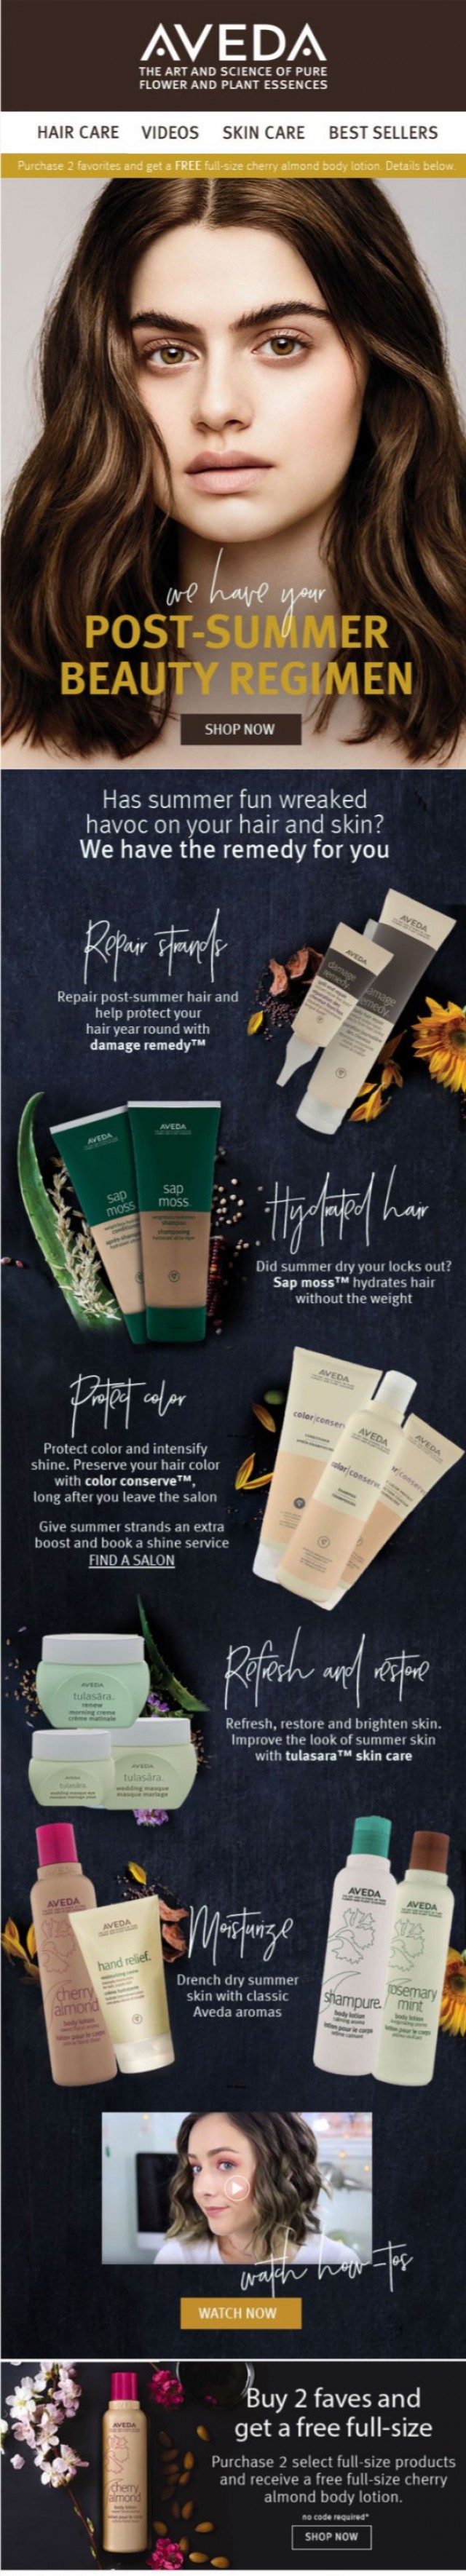 Coupon for: Aveda - Summer to fall beauty transition + Free full-size cherry almond